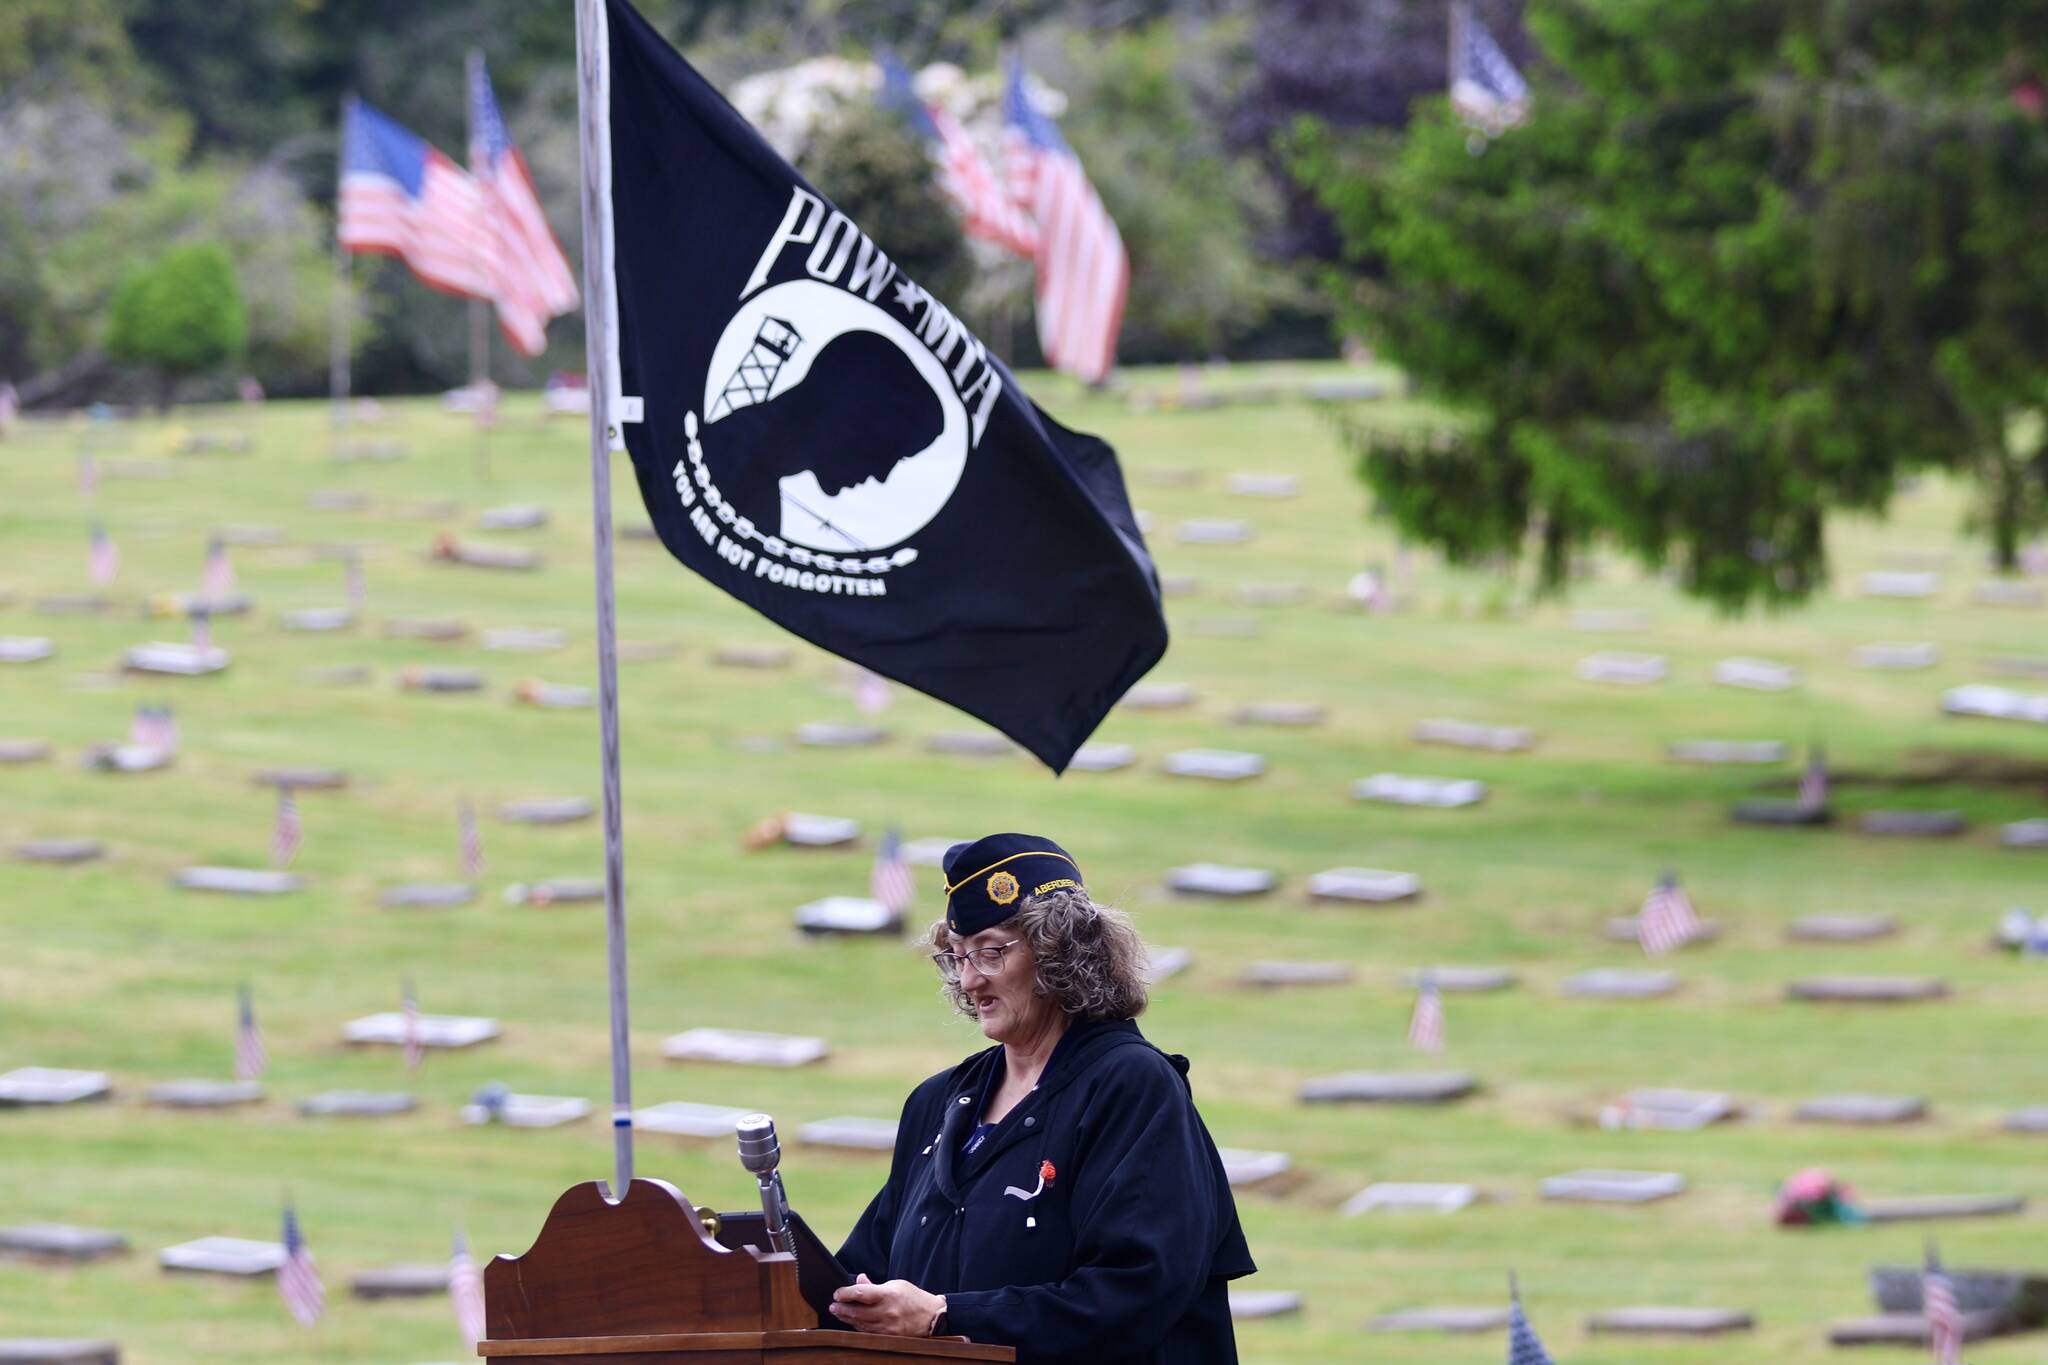 Grays Harbor County veteran relief fund ombudsman Gwyn Tarrence, seen here speaking at a Memorial Day event, had her contract extended by the county commission on Tuesday. (Michael S. Lockett / The Daily World File)